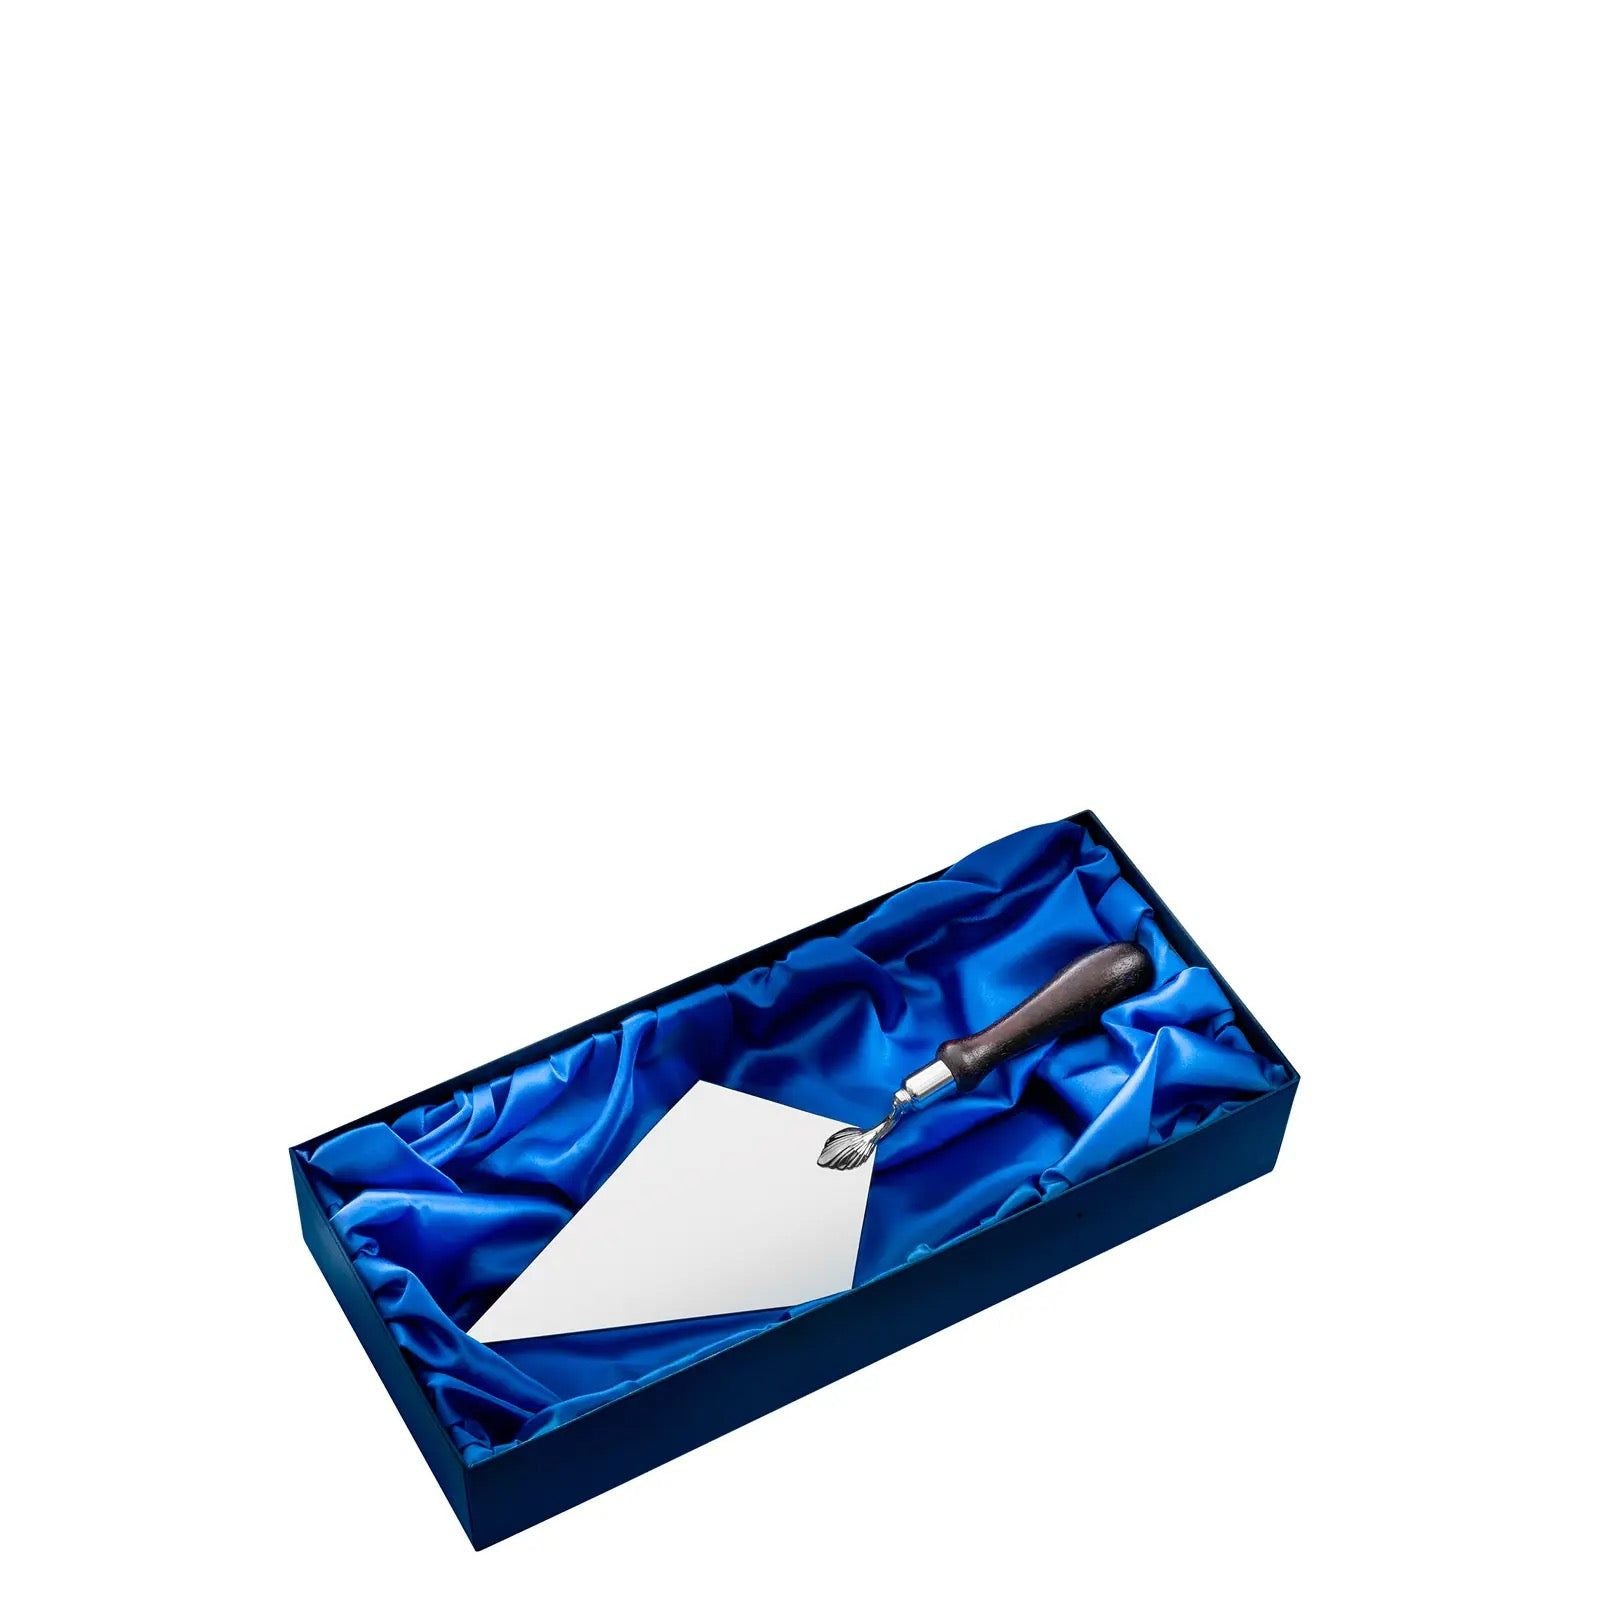 Nickel Plated Boxed Trowel (10.5in) with Rosewood Handle